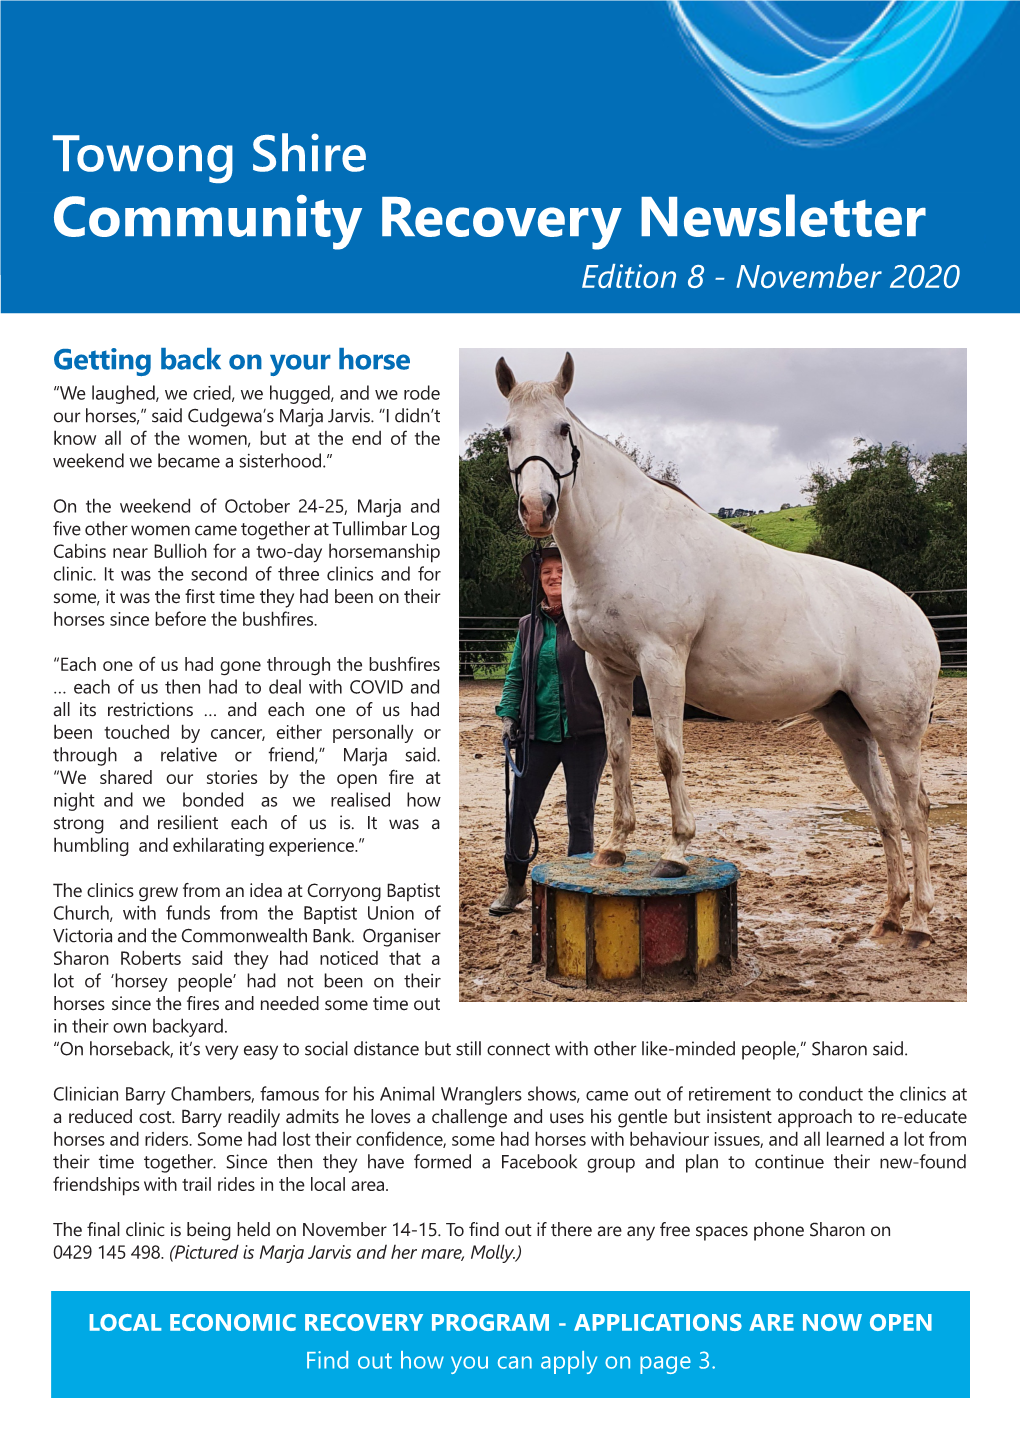 Towong Shire Community Recovery Newsletter Edition 8 - November 2020